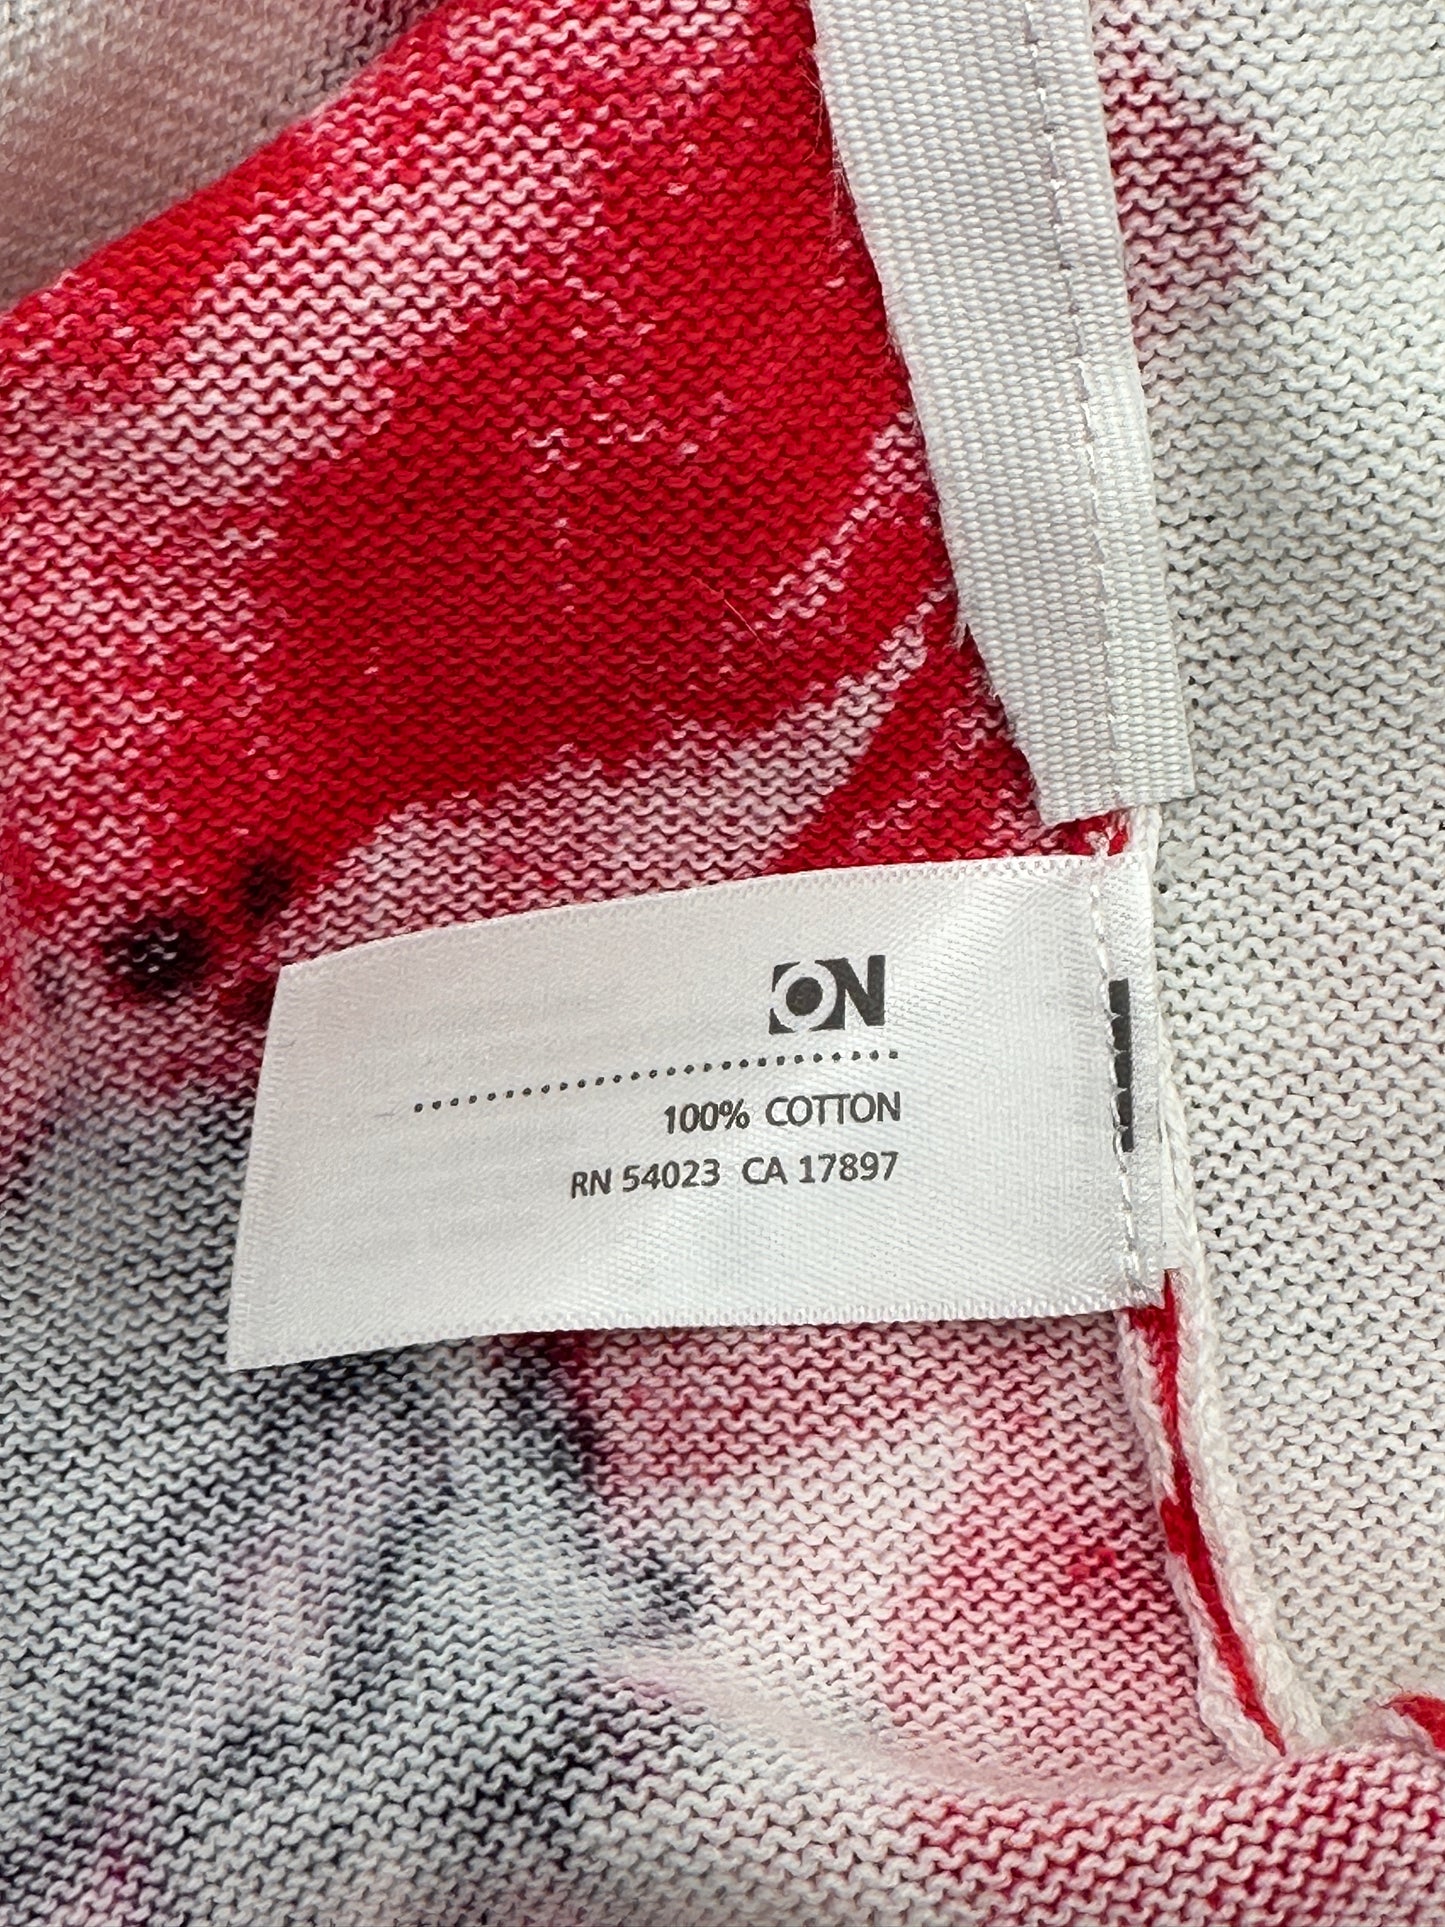 Old Navy Size XS White w/Red Poppies Button-Up Cardigan Sweater, EUC